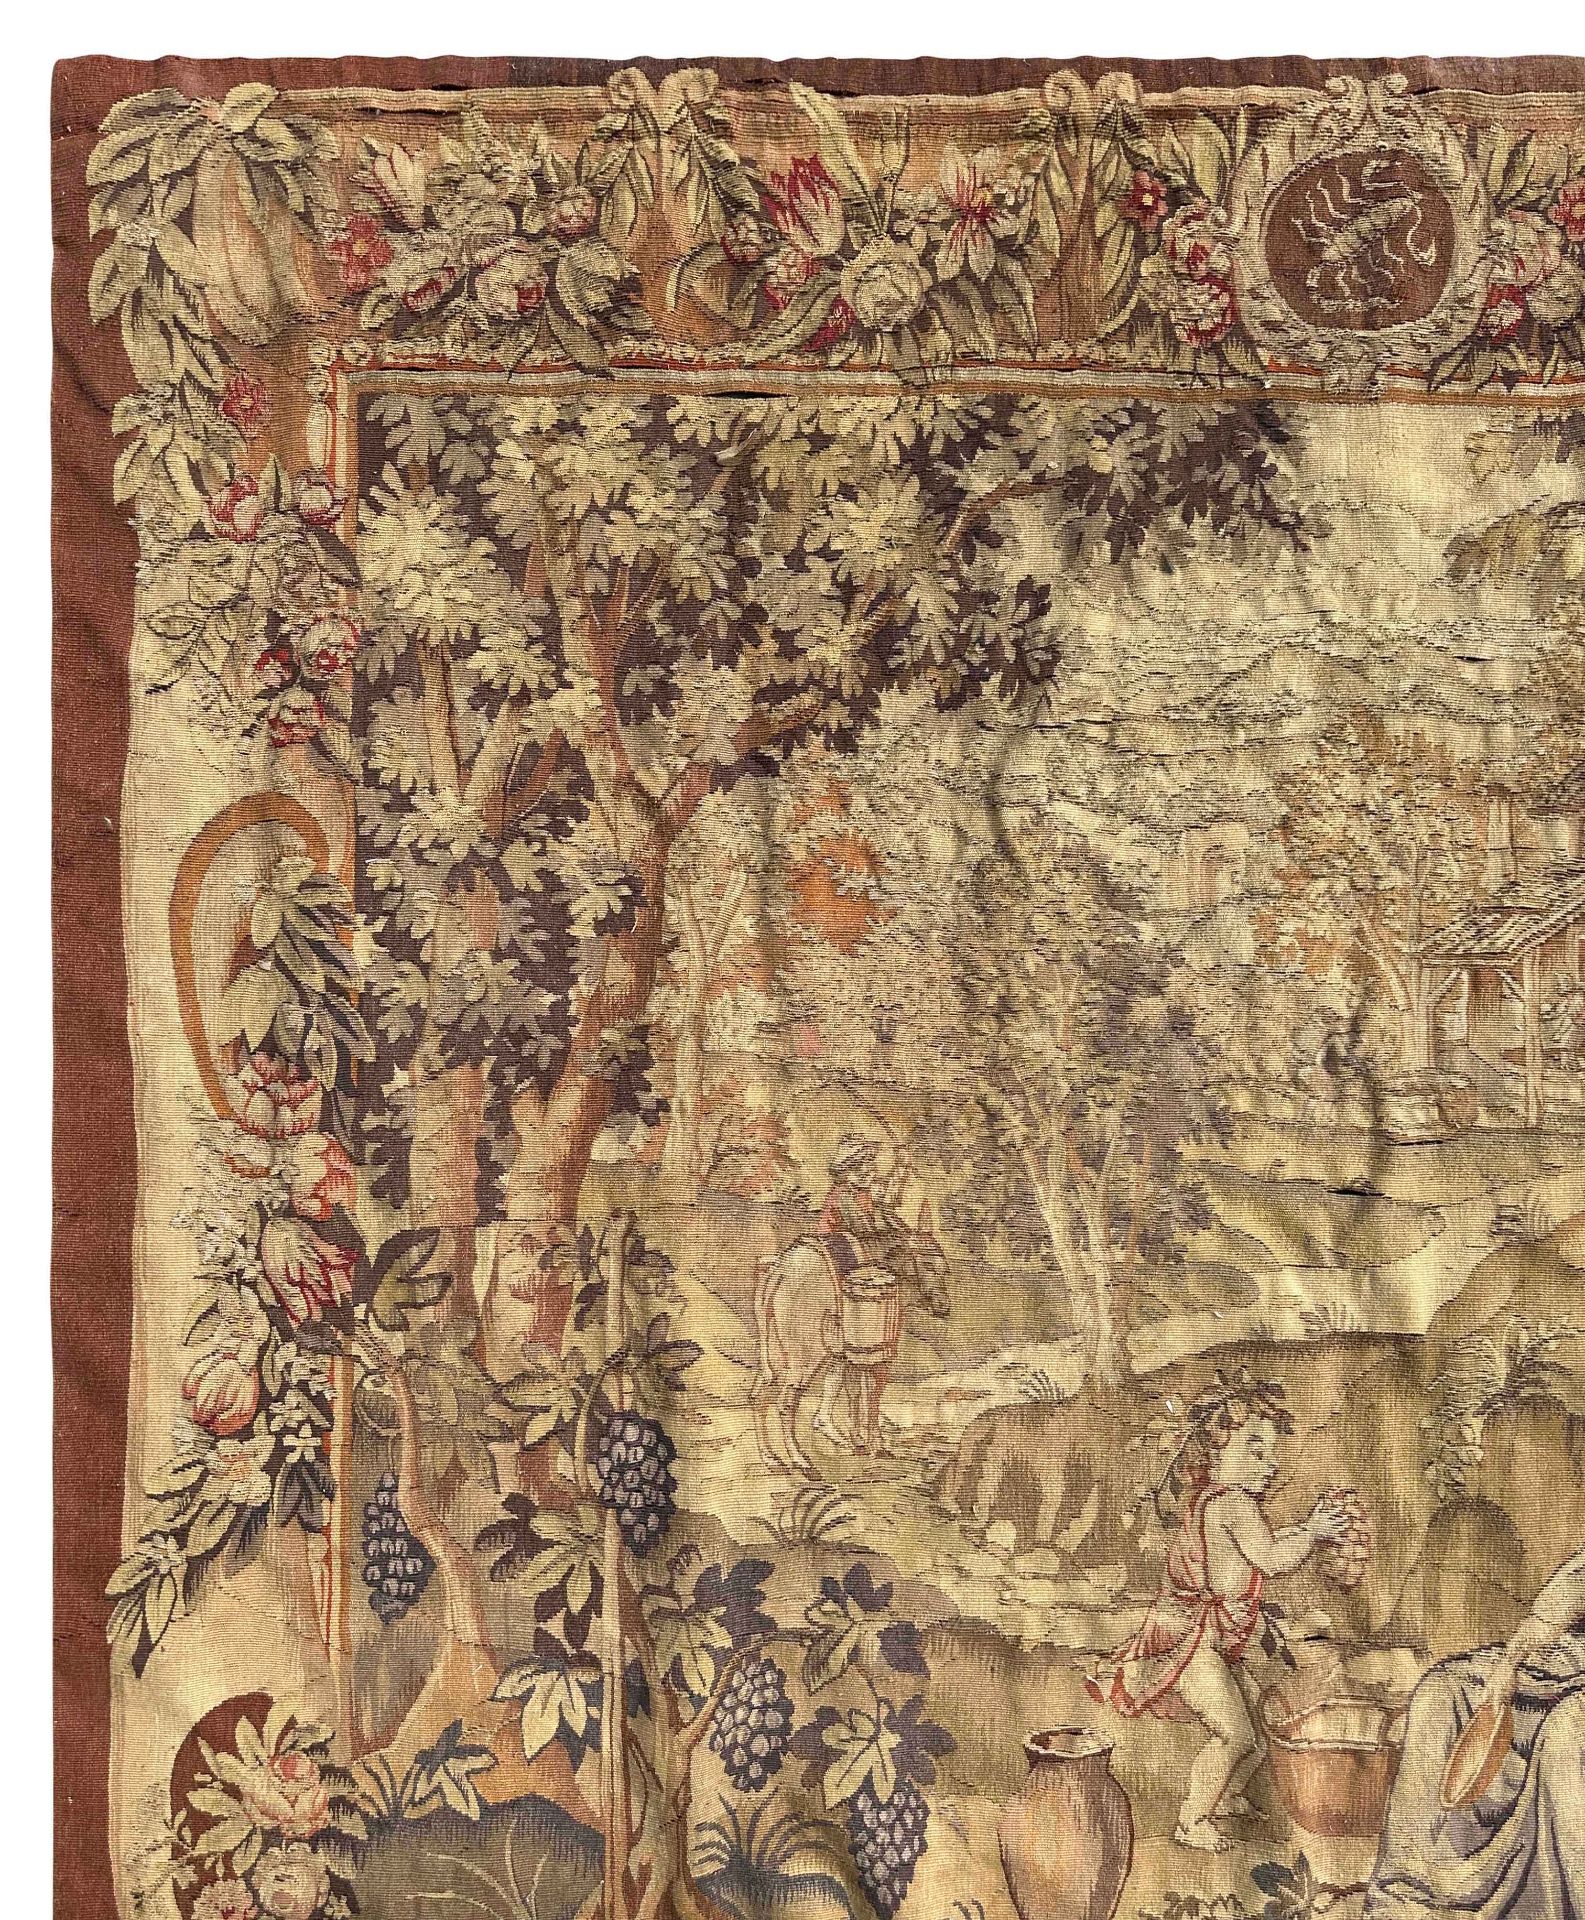 Tapestry. 19th century. Youthful Bacchus. - Image 4 of 12